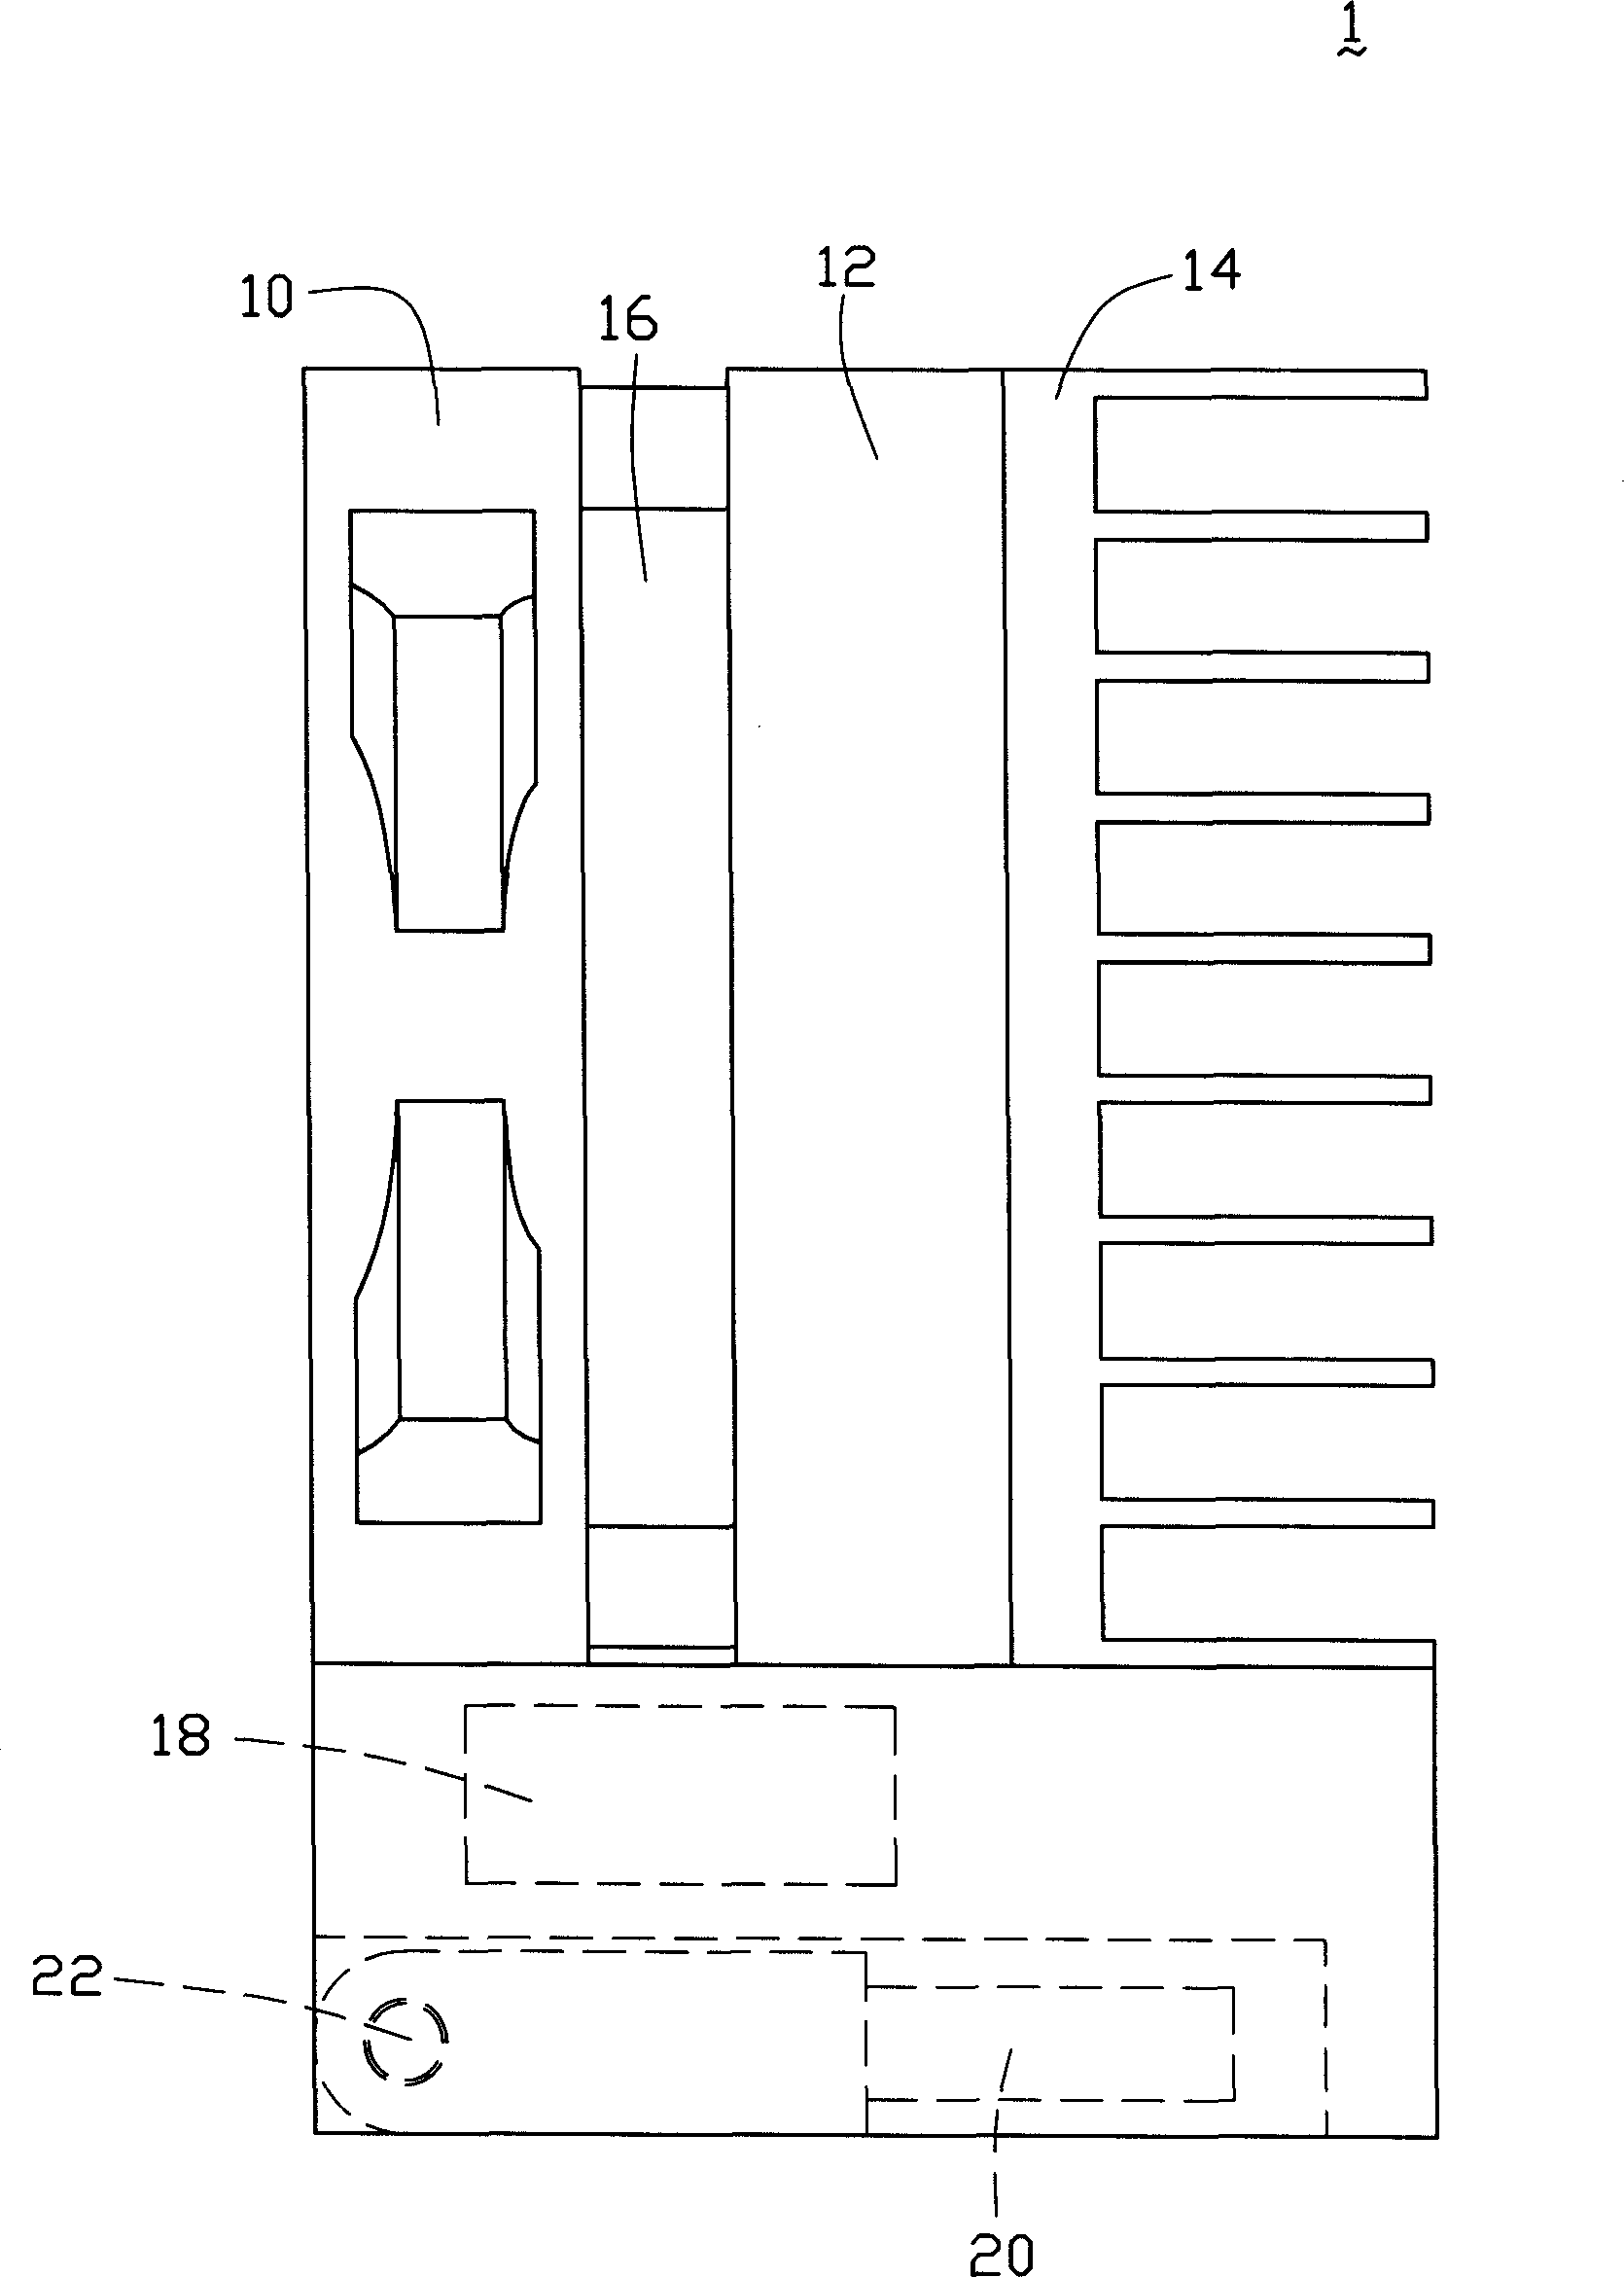 Heat sink device for electronic equipment and method therefor